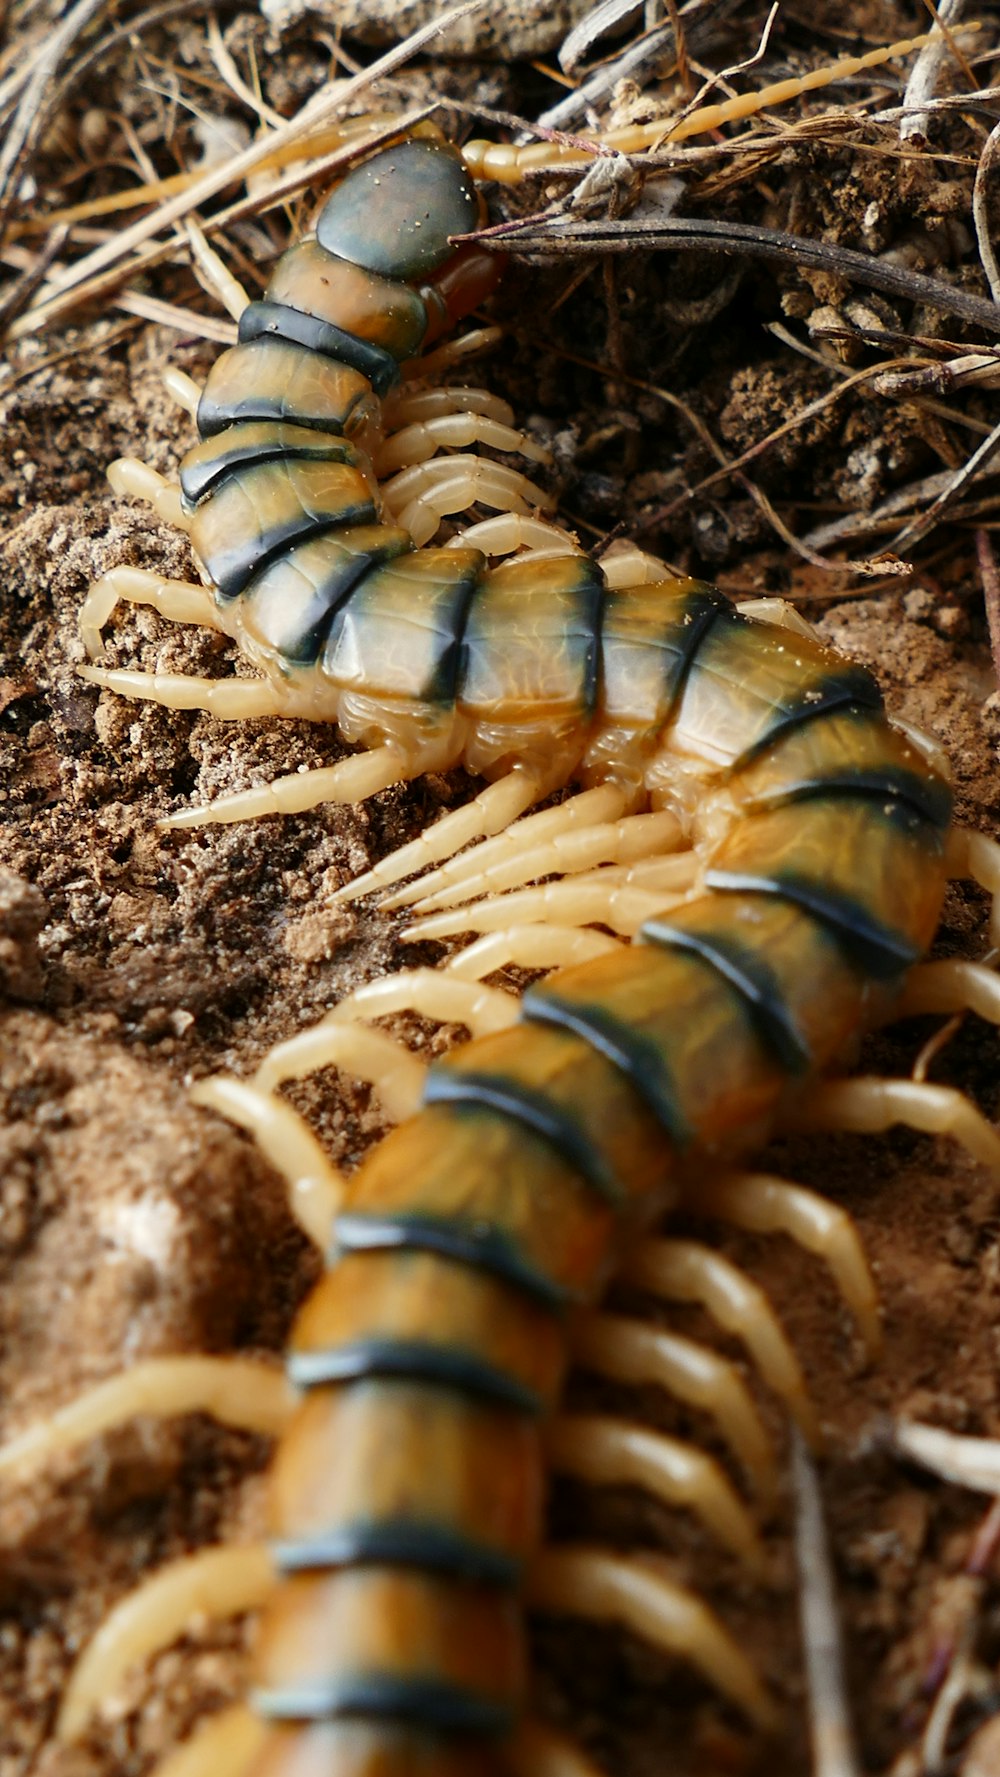 a close up of a caterpillar on the ground